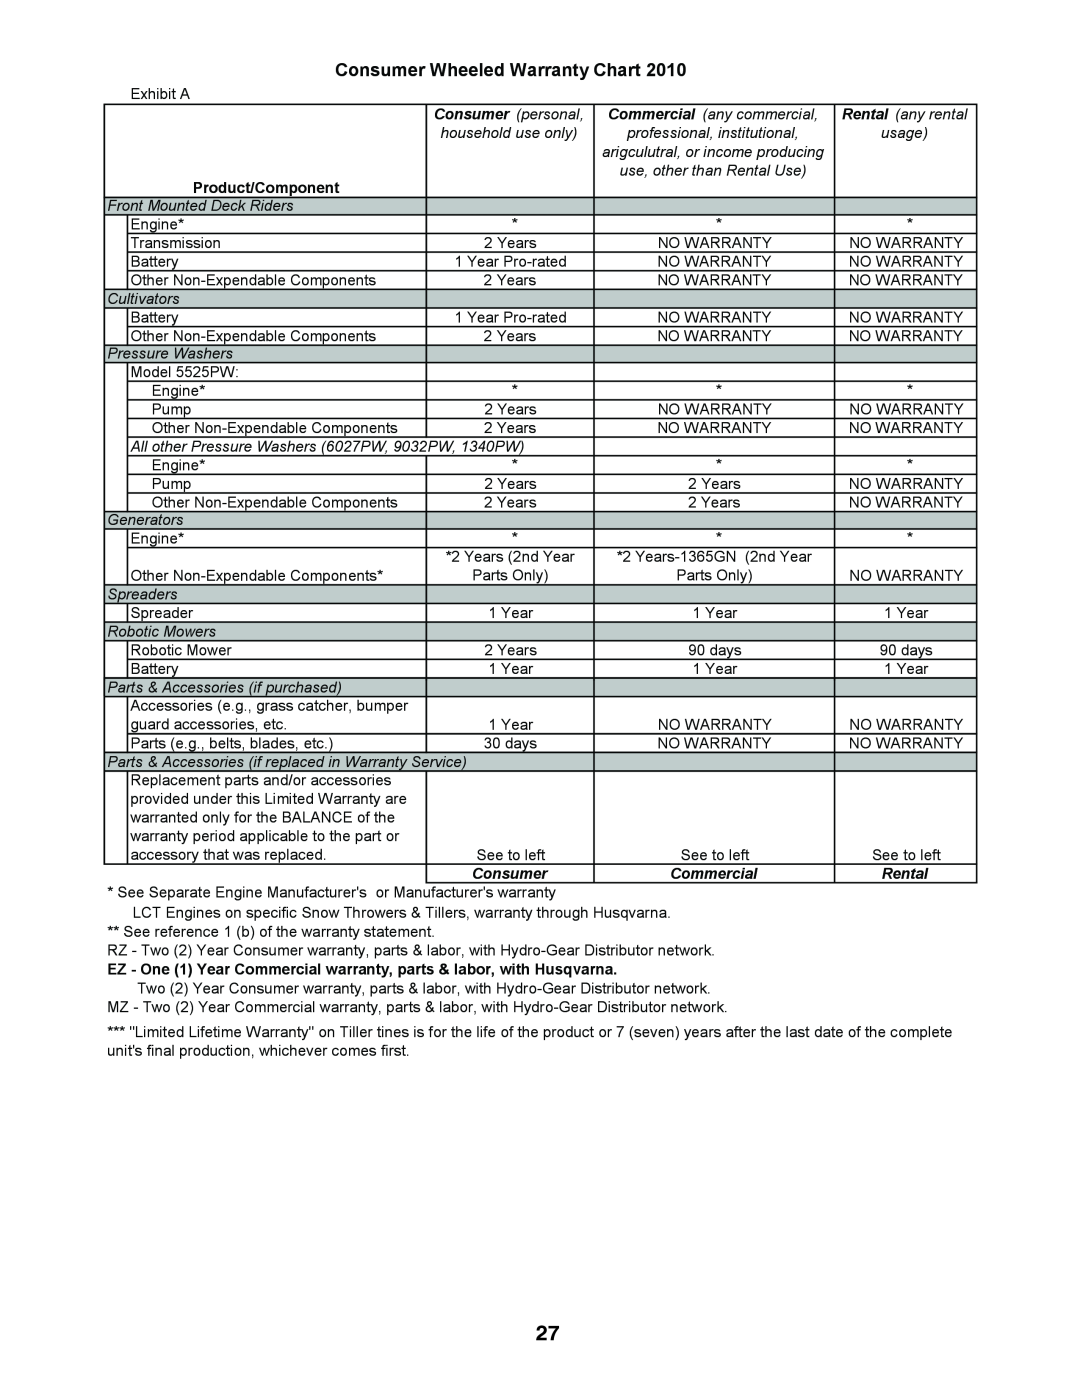 Husqvarna FT900 owner manual Consumer Wheeled Warranty Chart, Klelw$, Product/Component 